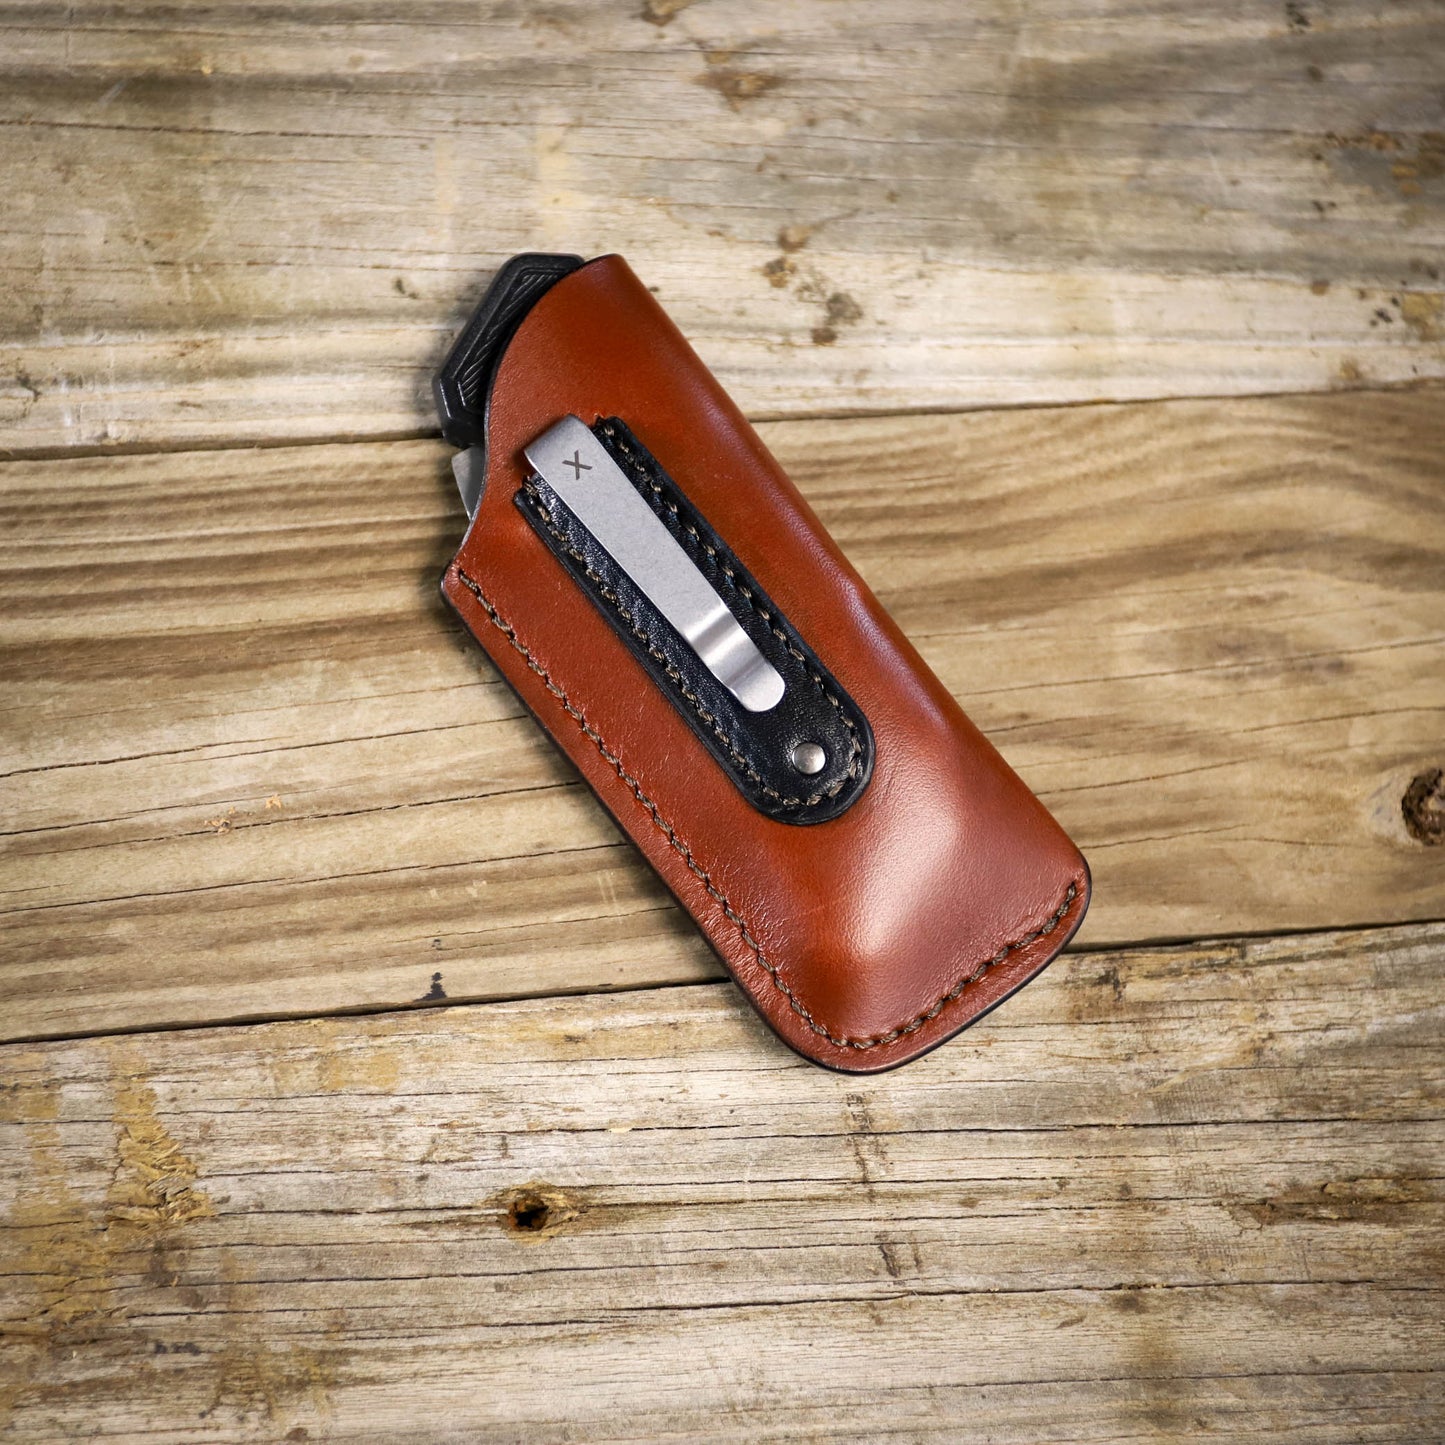 SBL Pocket Sheath. Basic. Large. With Clip. Brown. Black Accent. Brown Stitch.